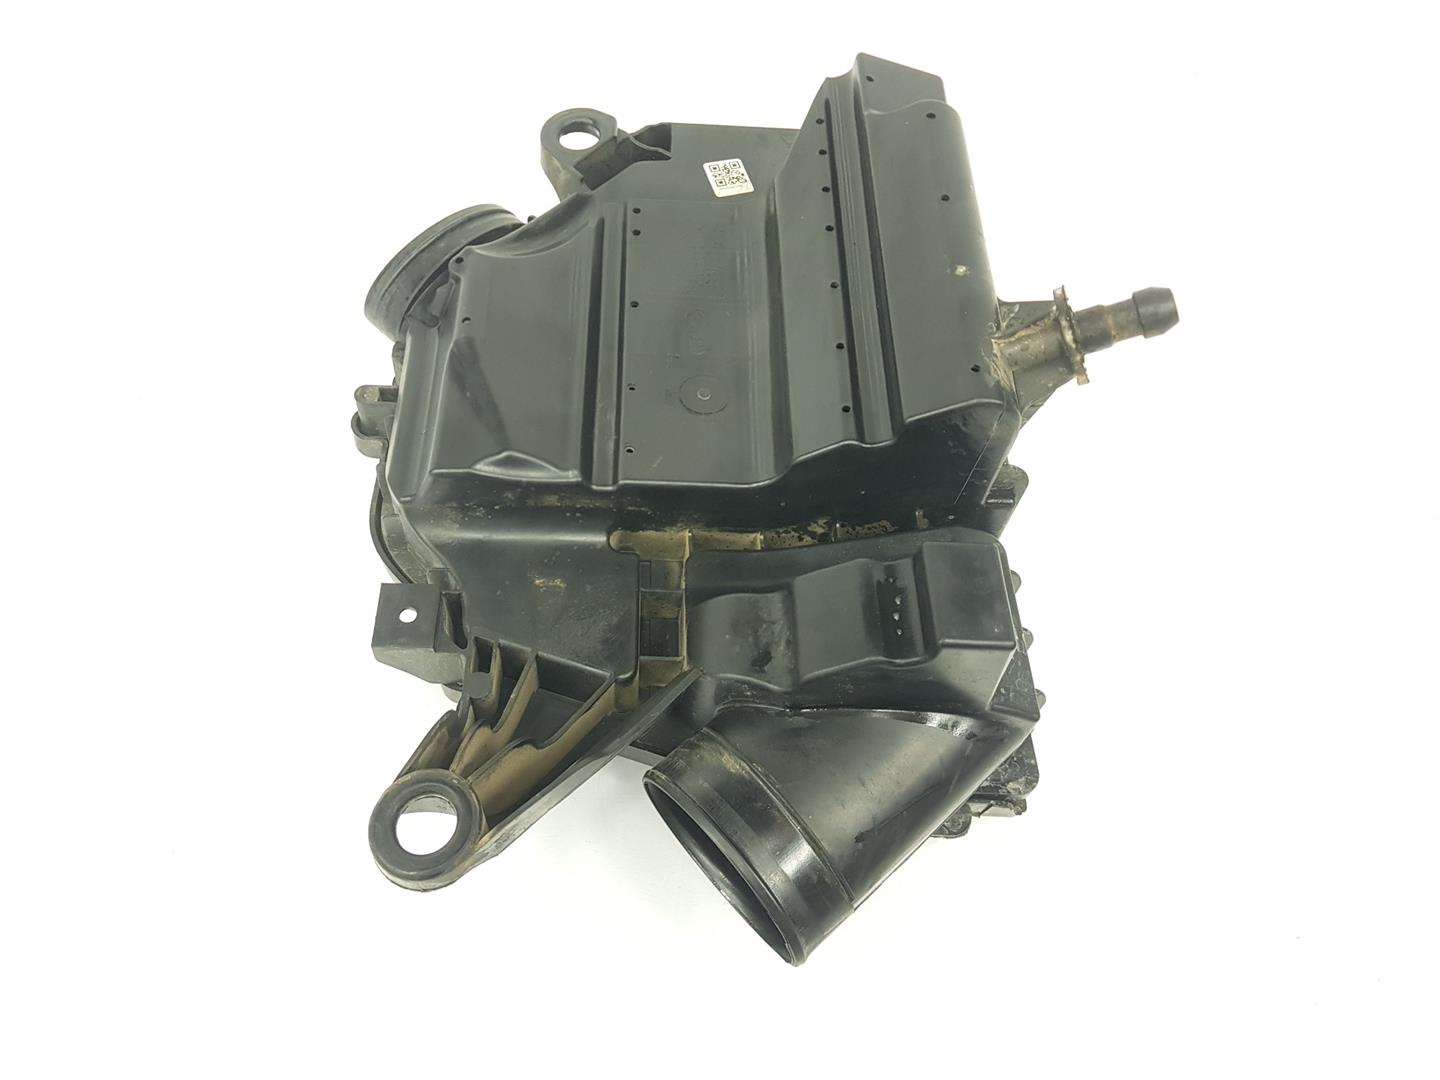 OPEL Combo D (2011-2020) Other Engine Compartment Parts 51978076, 95524774 19796404